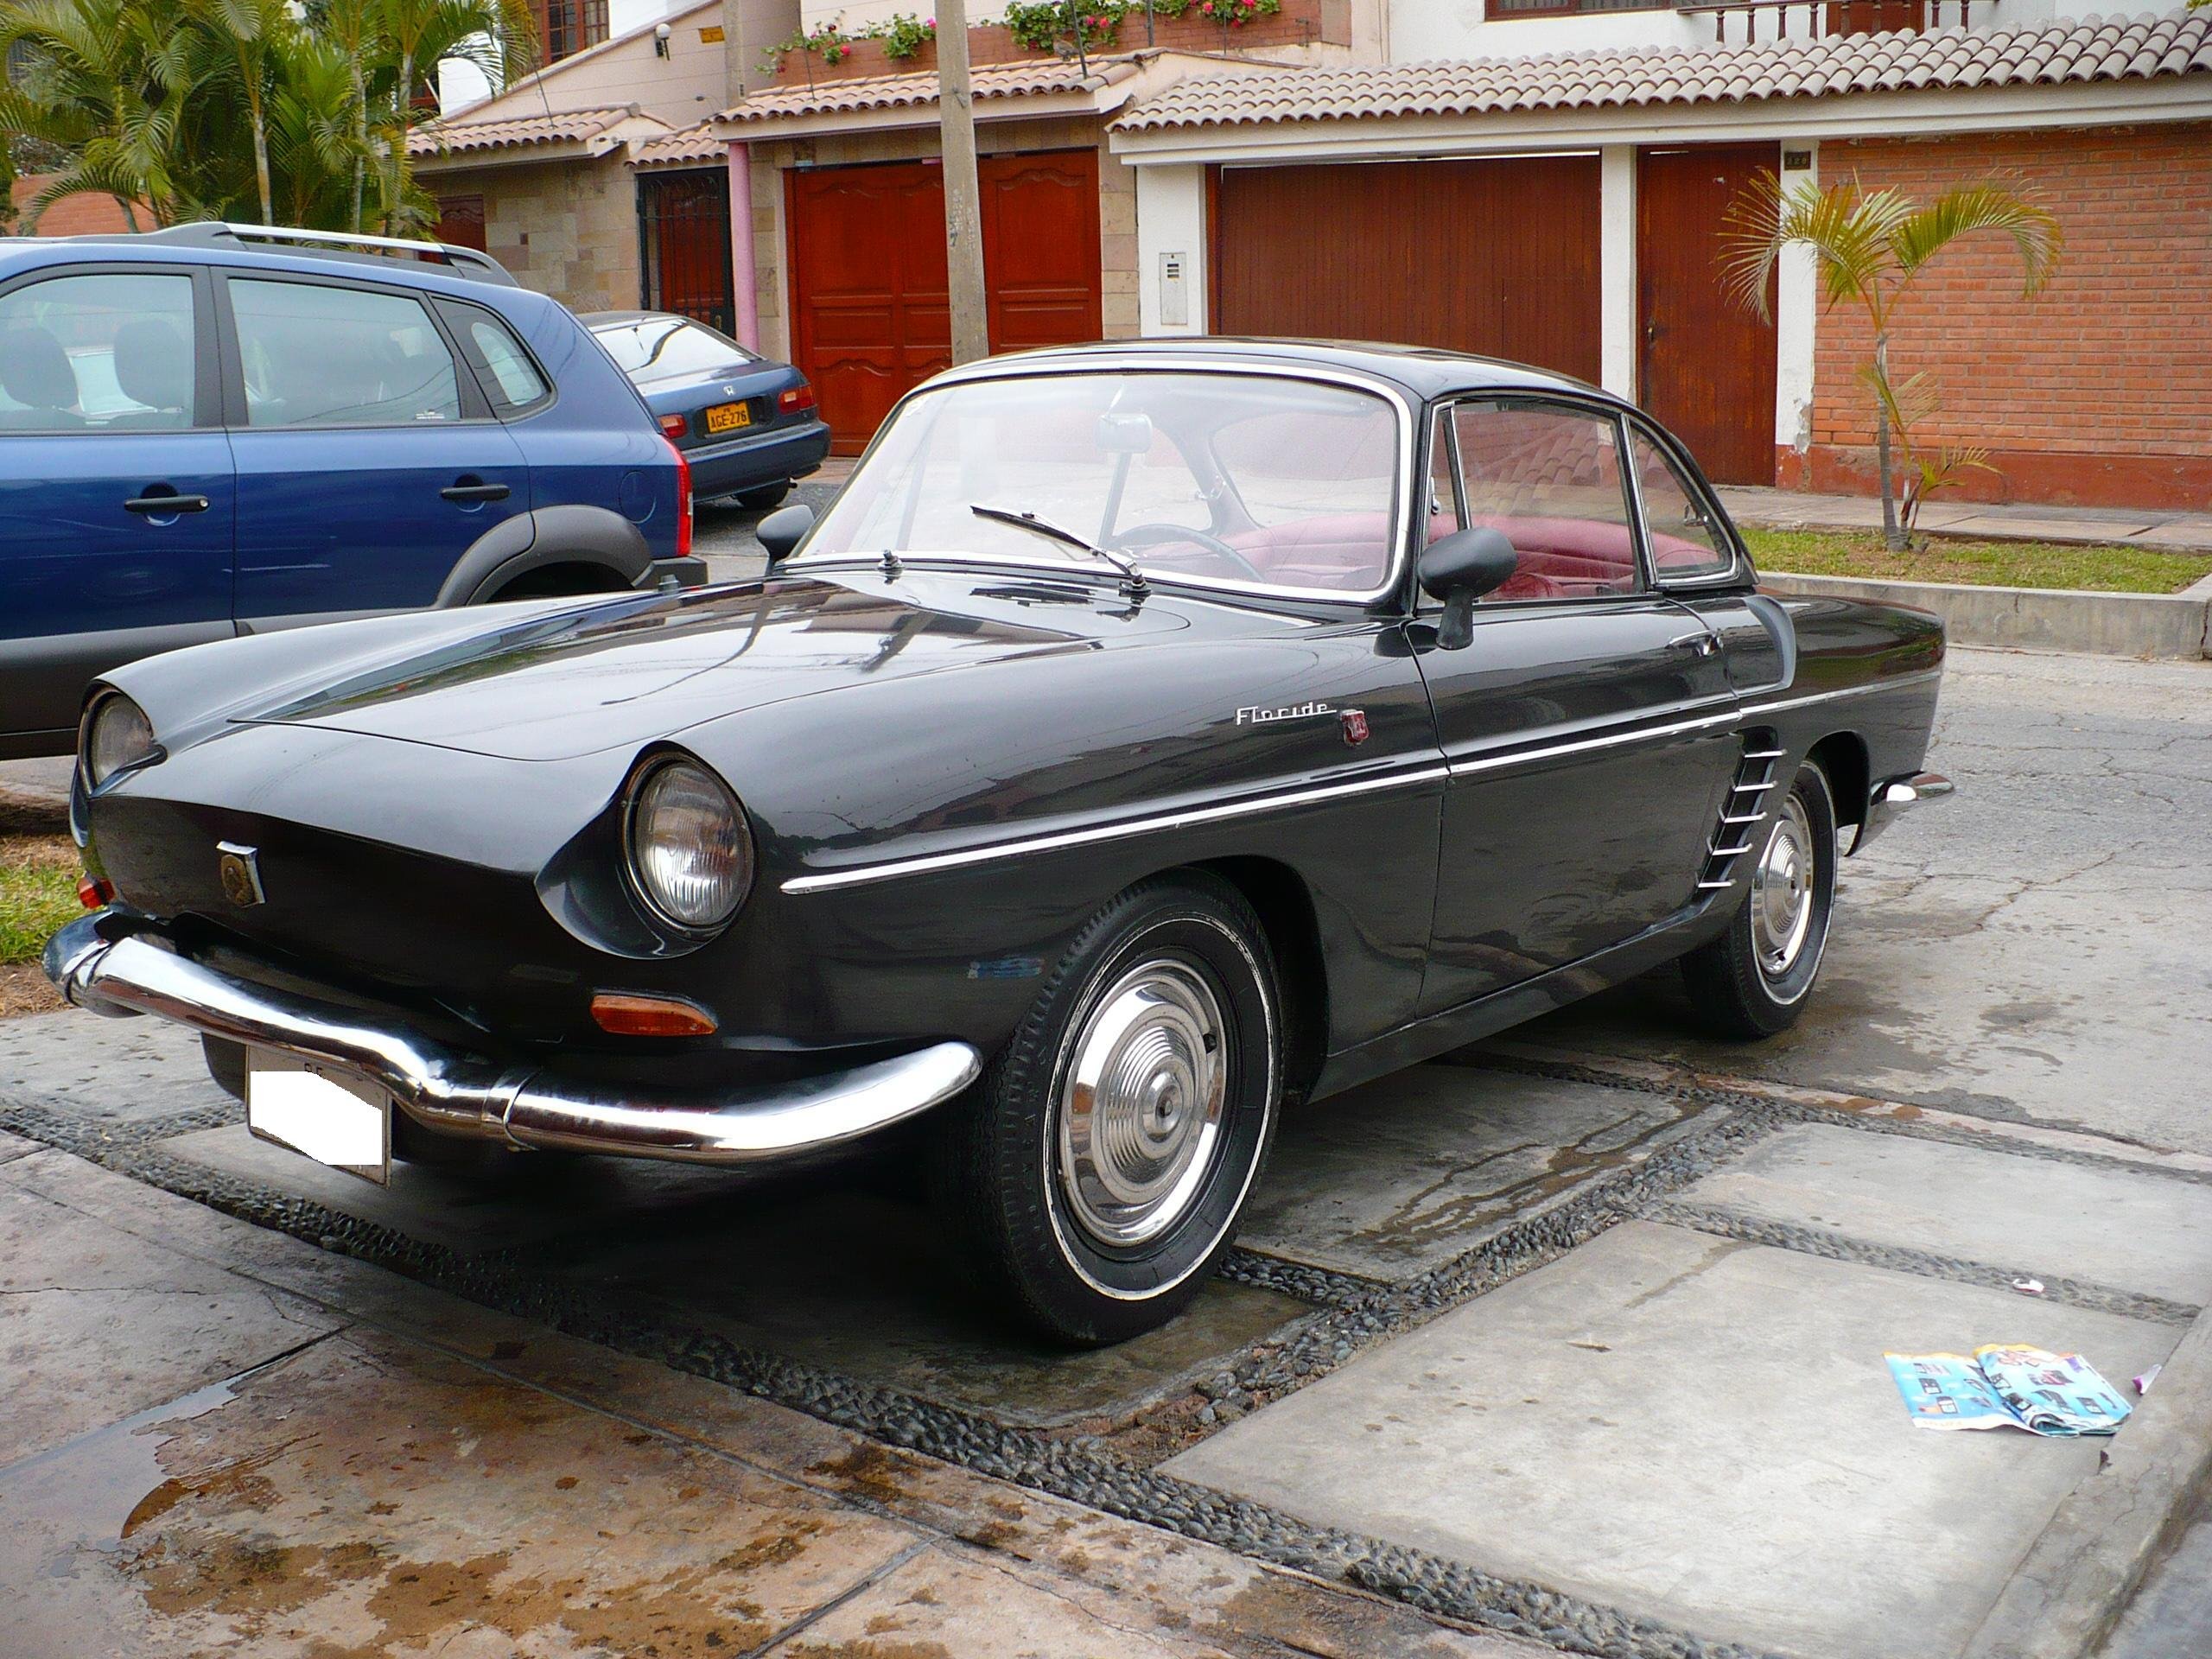 renault, Floride, Caravelle, Classic, Convertible, Cabriolet, Cars, French Wallpaper